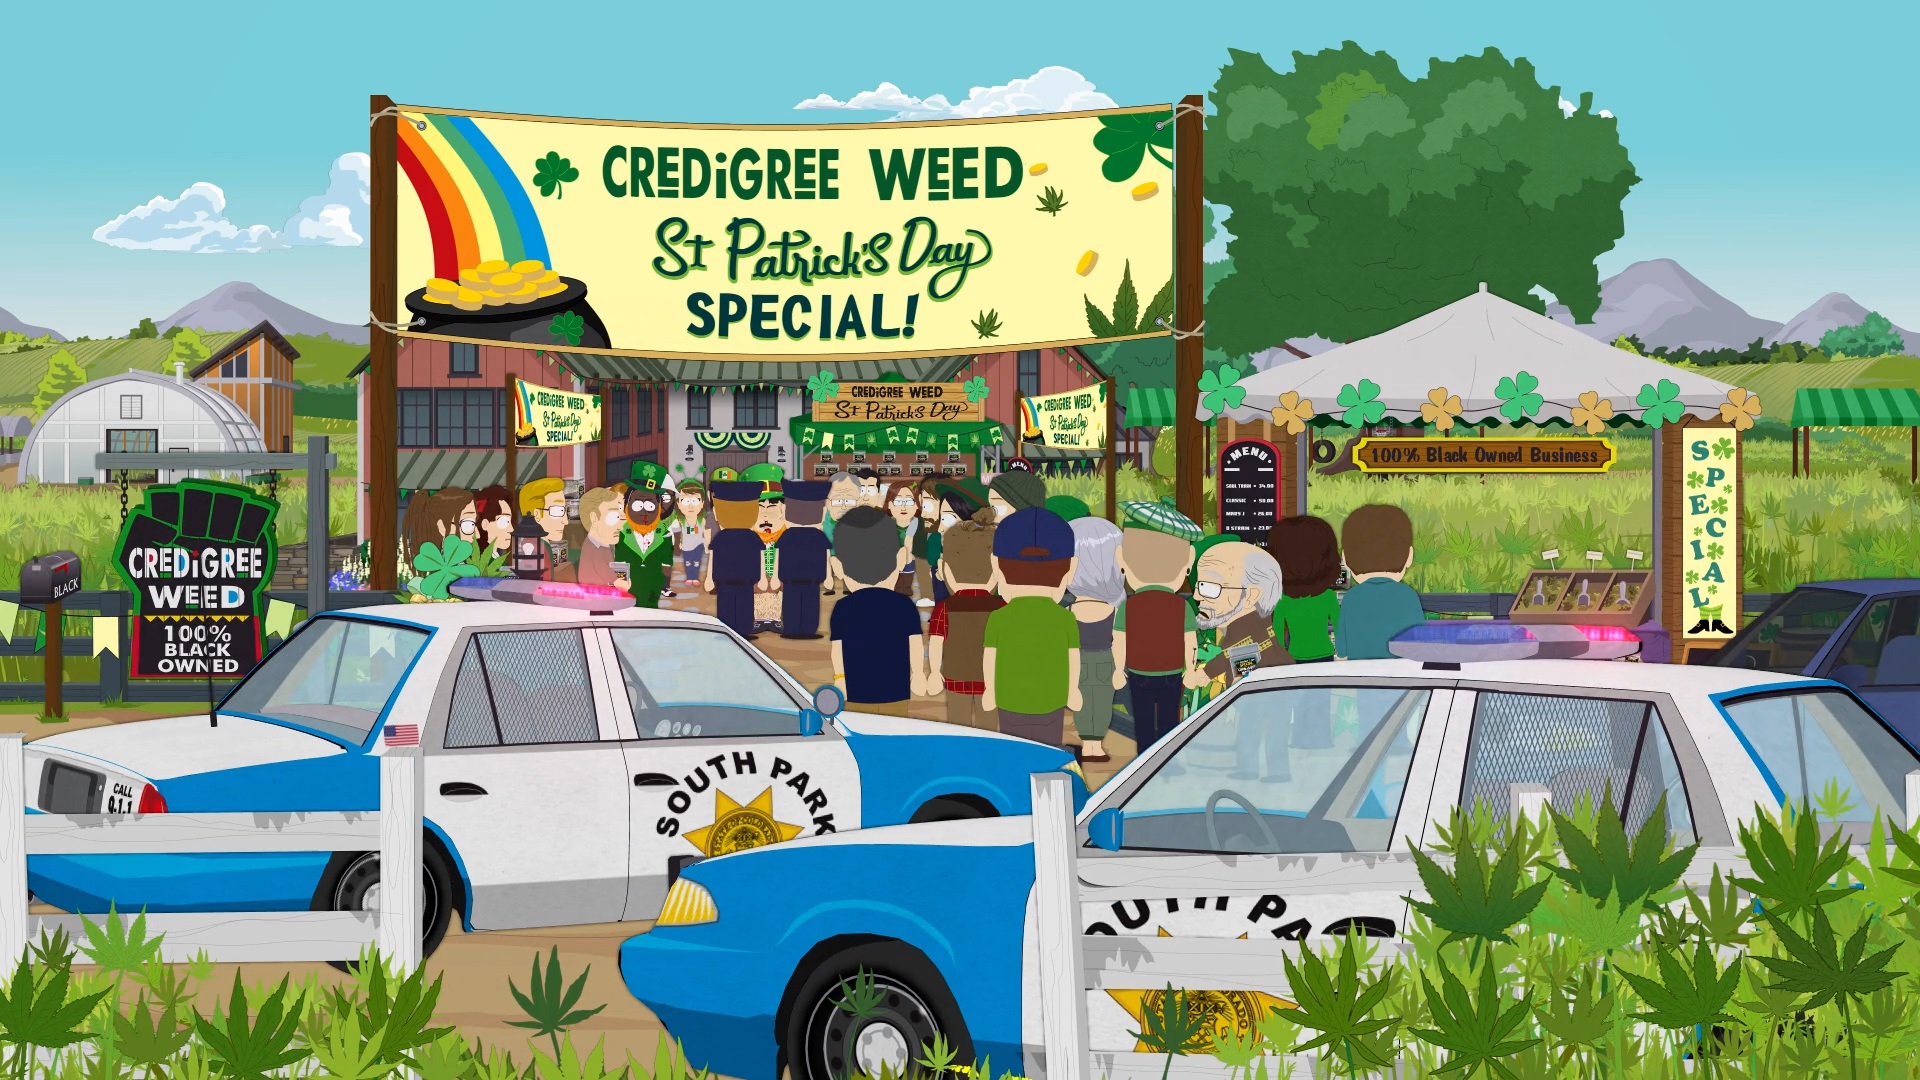 Credigree Weed St. Patrick's Day Special - Season 25 Episode 6 - South Park